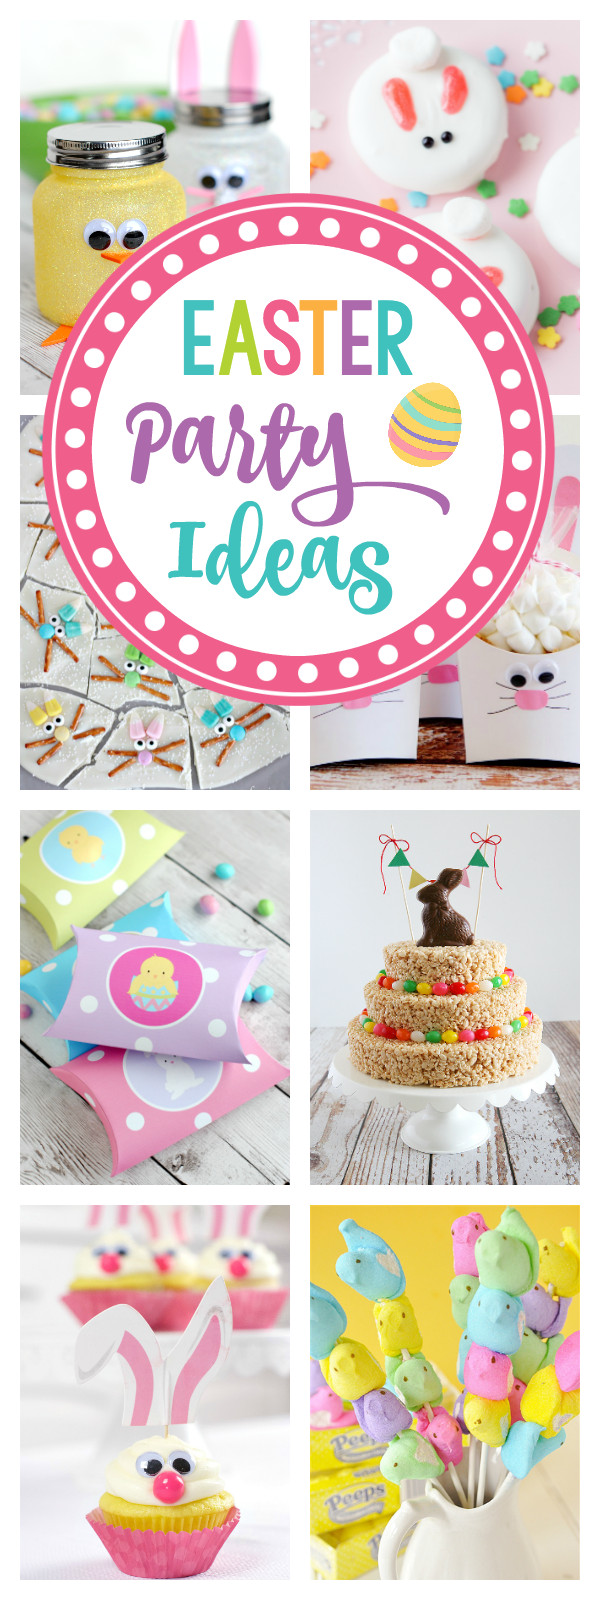 Free Easter Party Ideas
 25 Easter Party Ideas – Fun Squared